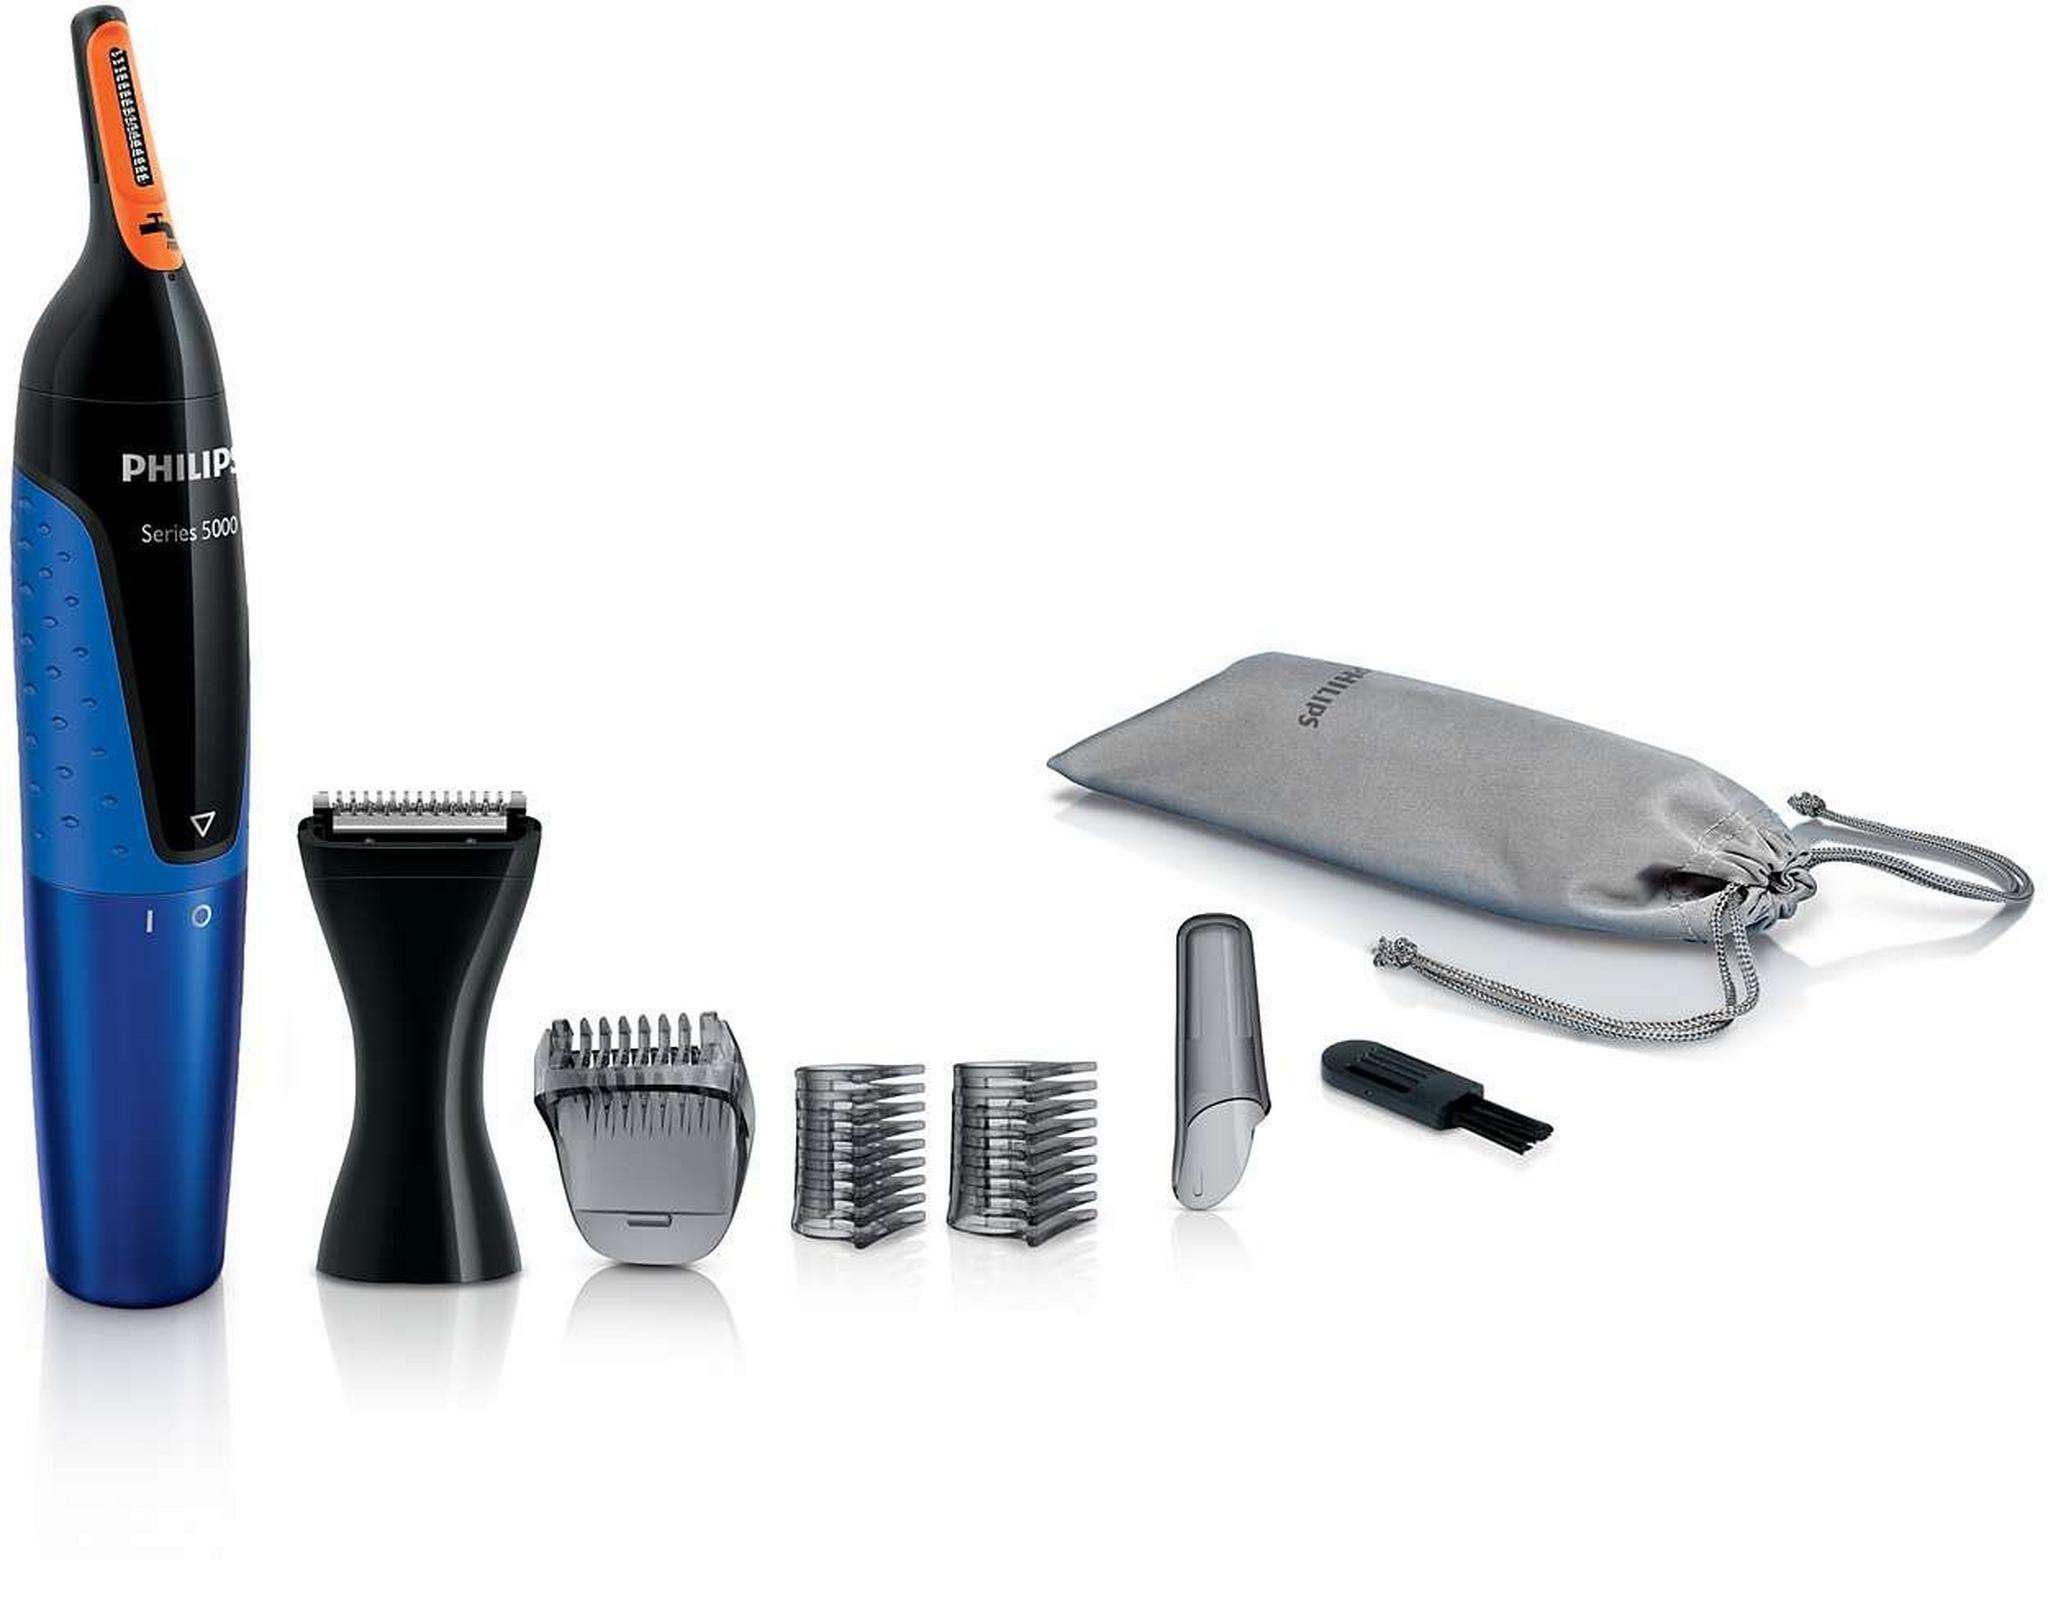 Philips Norelco NT5175/16 Nose, Eyebrows & Ear Trimmer